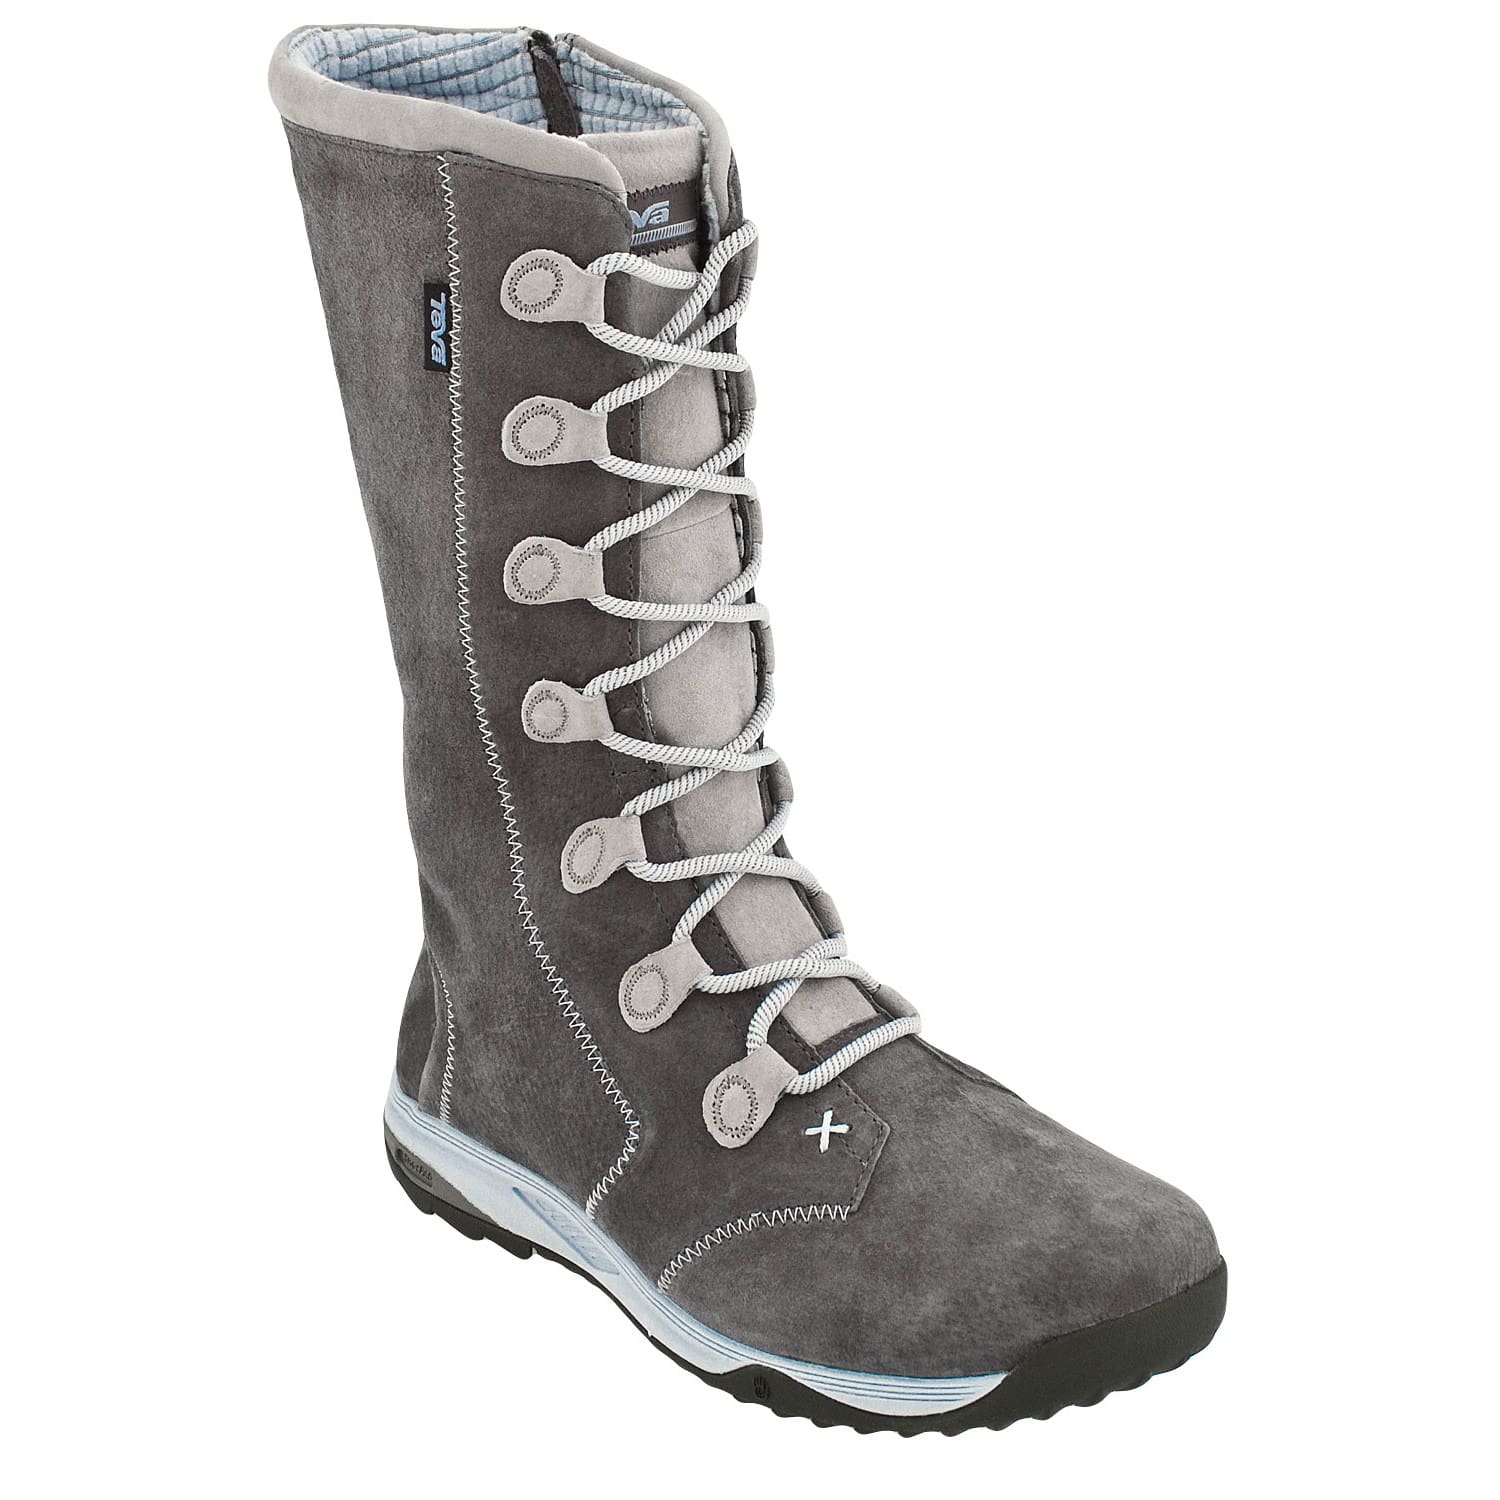 Buy Teva Vero Boot WP from Outnorth